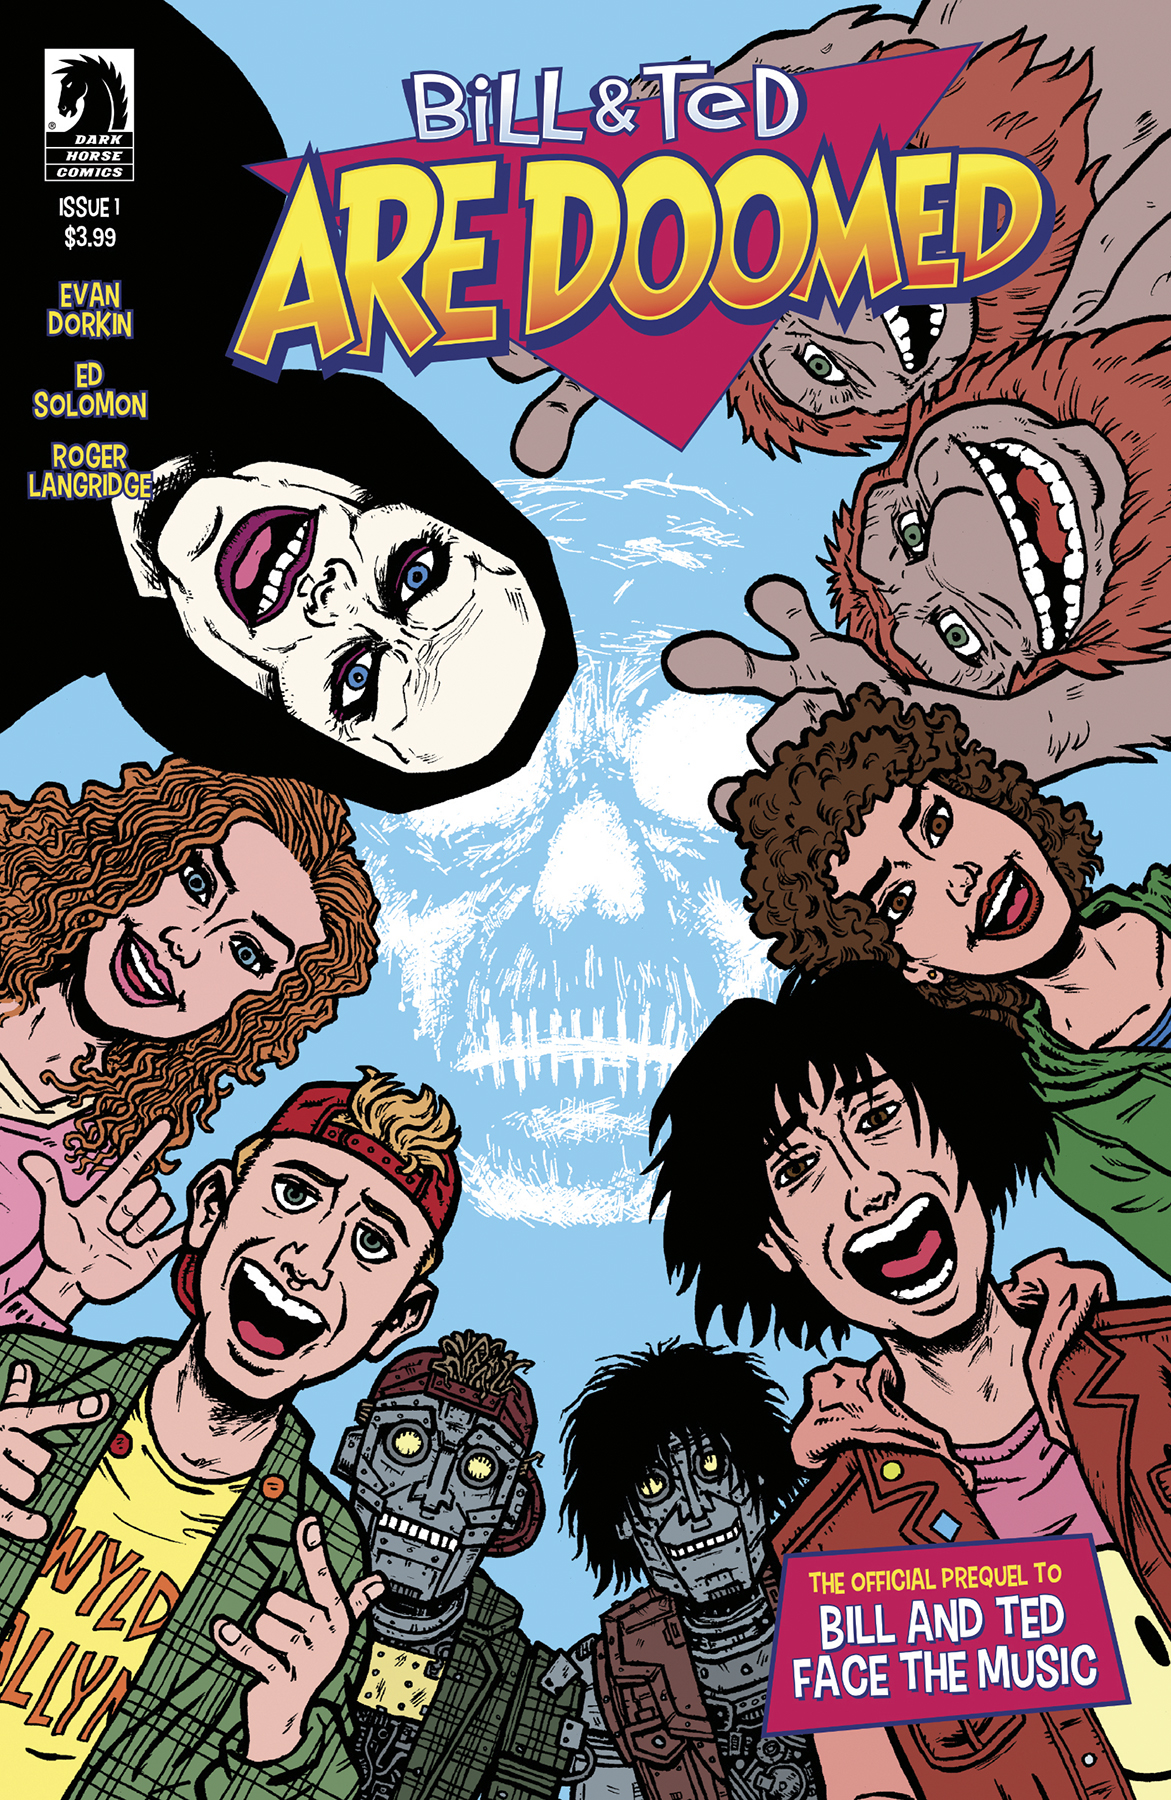 Bill & Ted Are Doomed #1 Cover A Dorkin (Of 4)